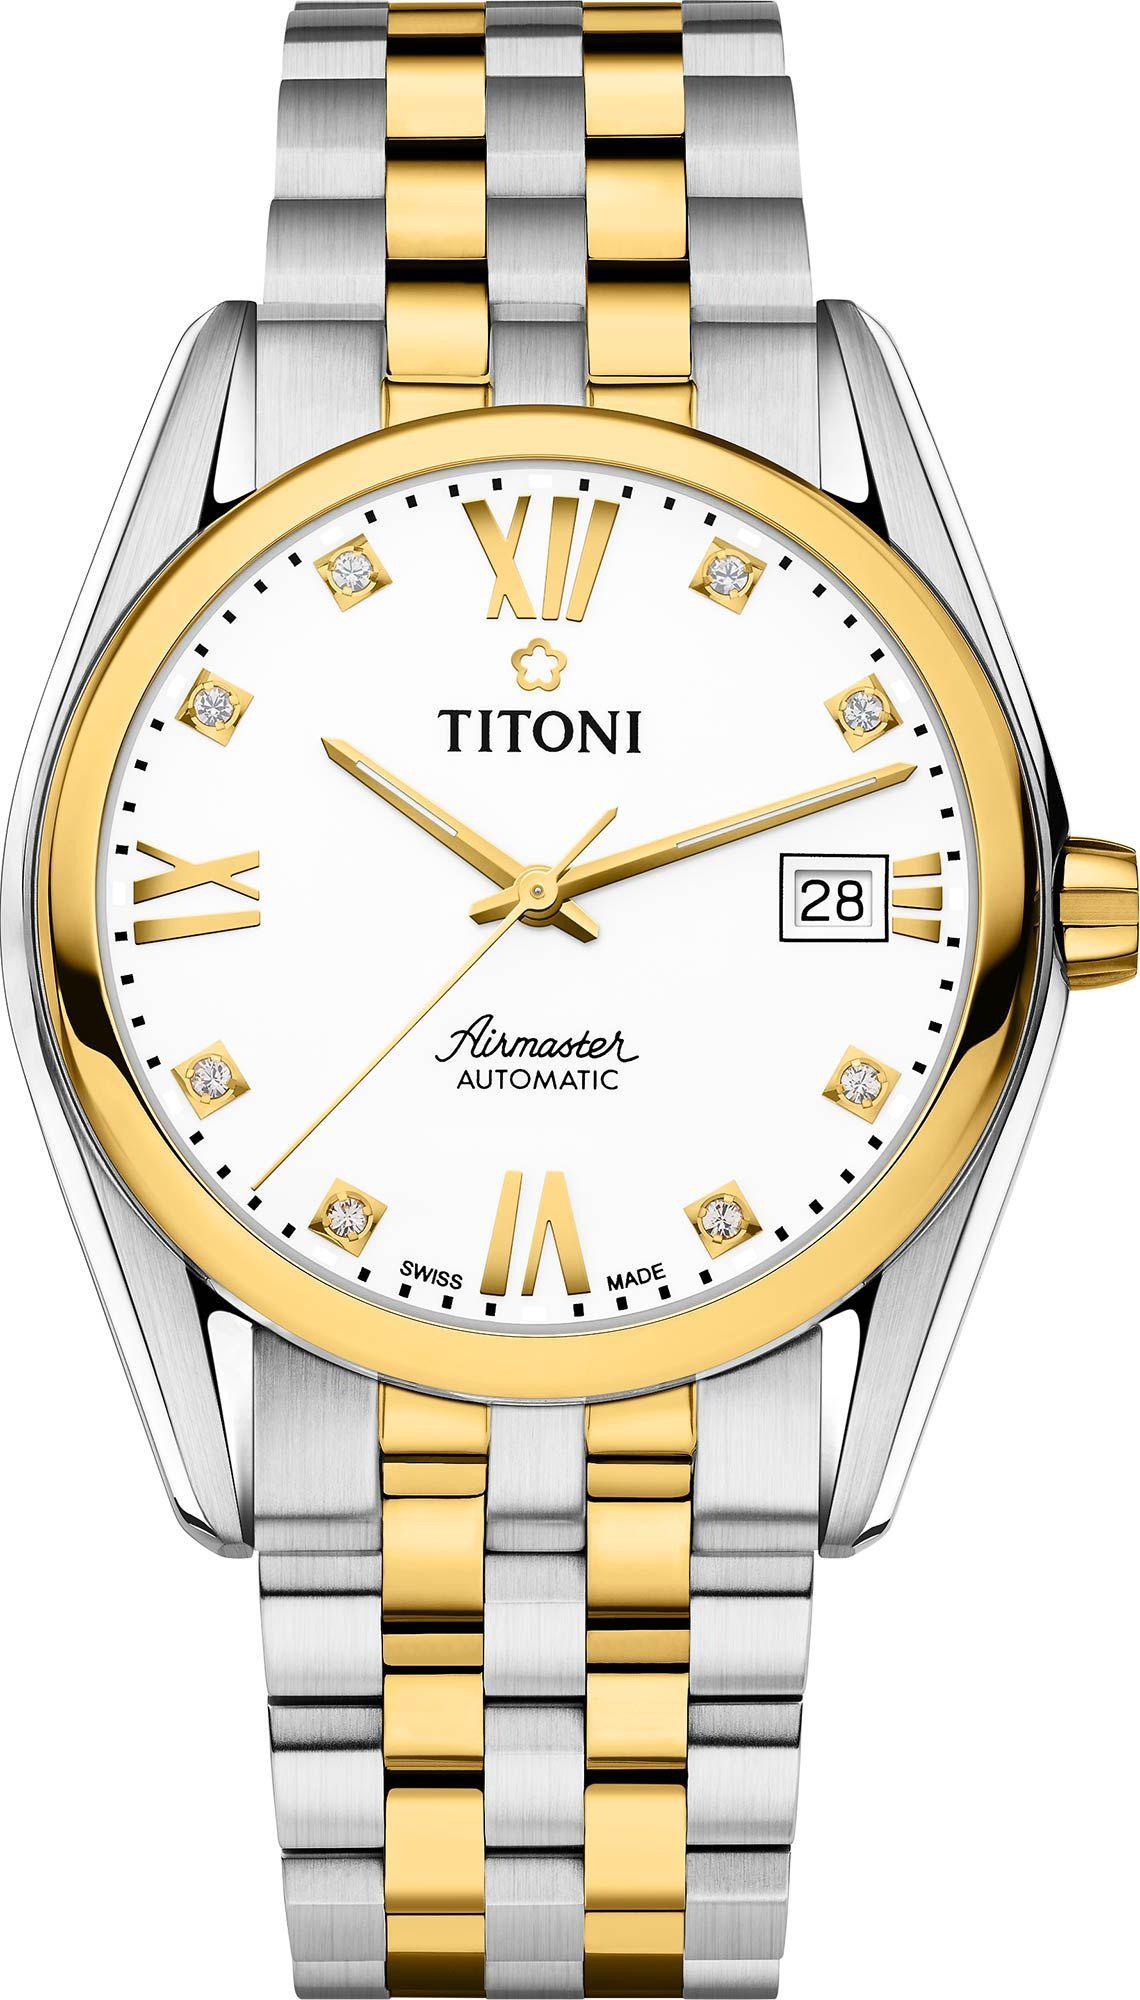 Titoni Airmaster  White Dial 38.5 mm Automatic Watch For Men - 1